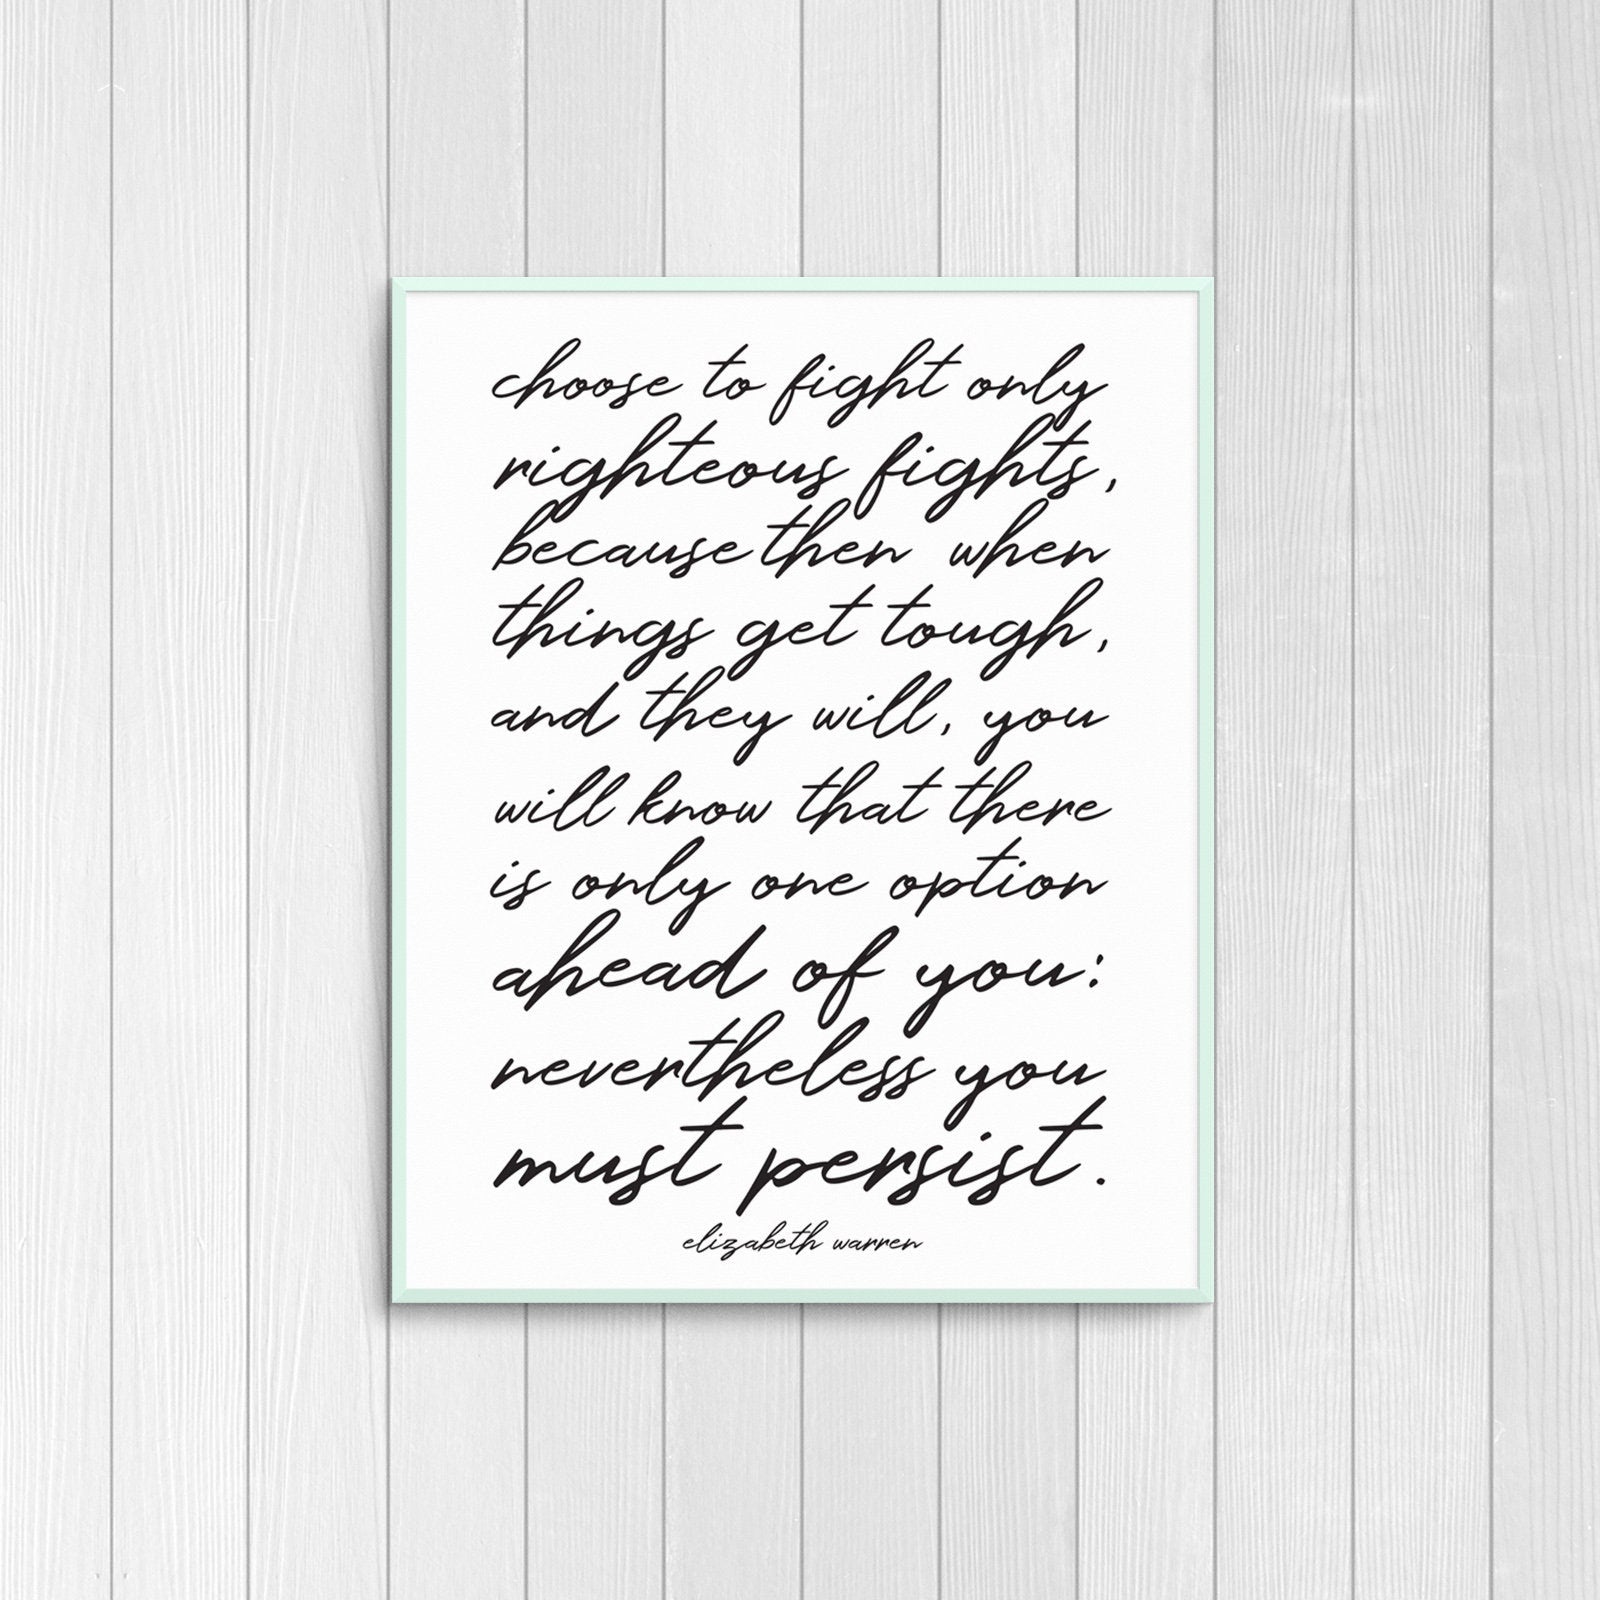 DIGITAL DOWNLOAD "Fight only righteous fights..." - Elizabeth Warren Printable, Home Decor, Signage, Quotes